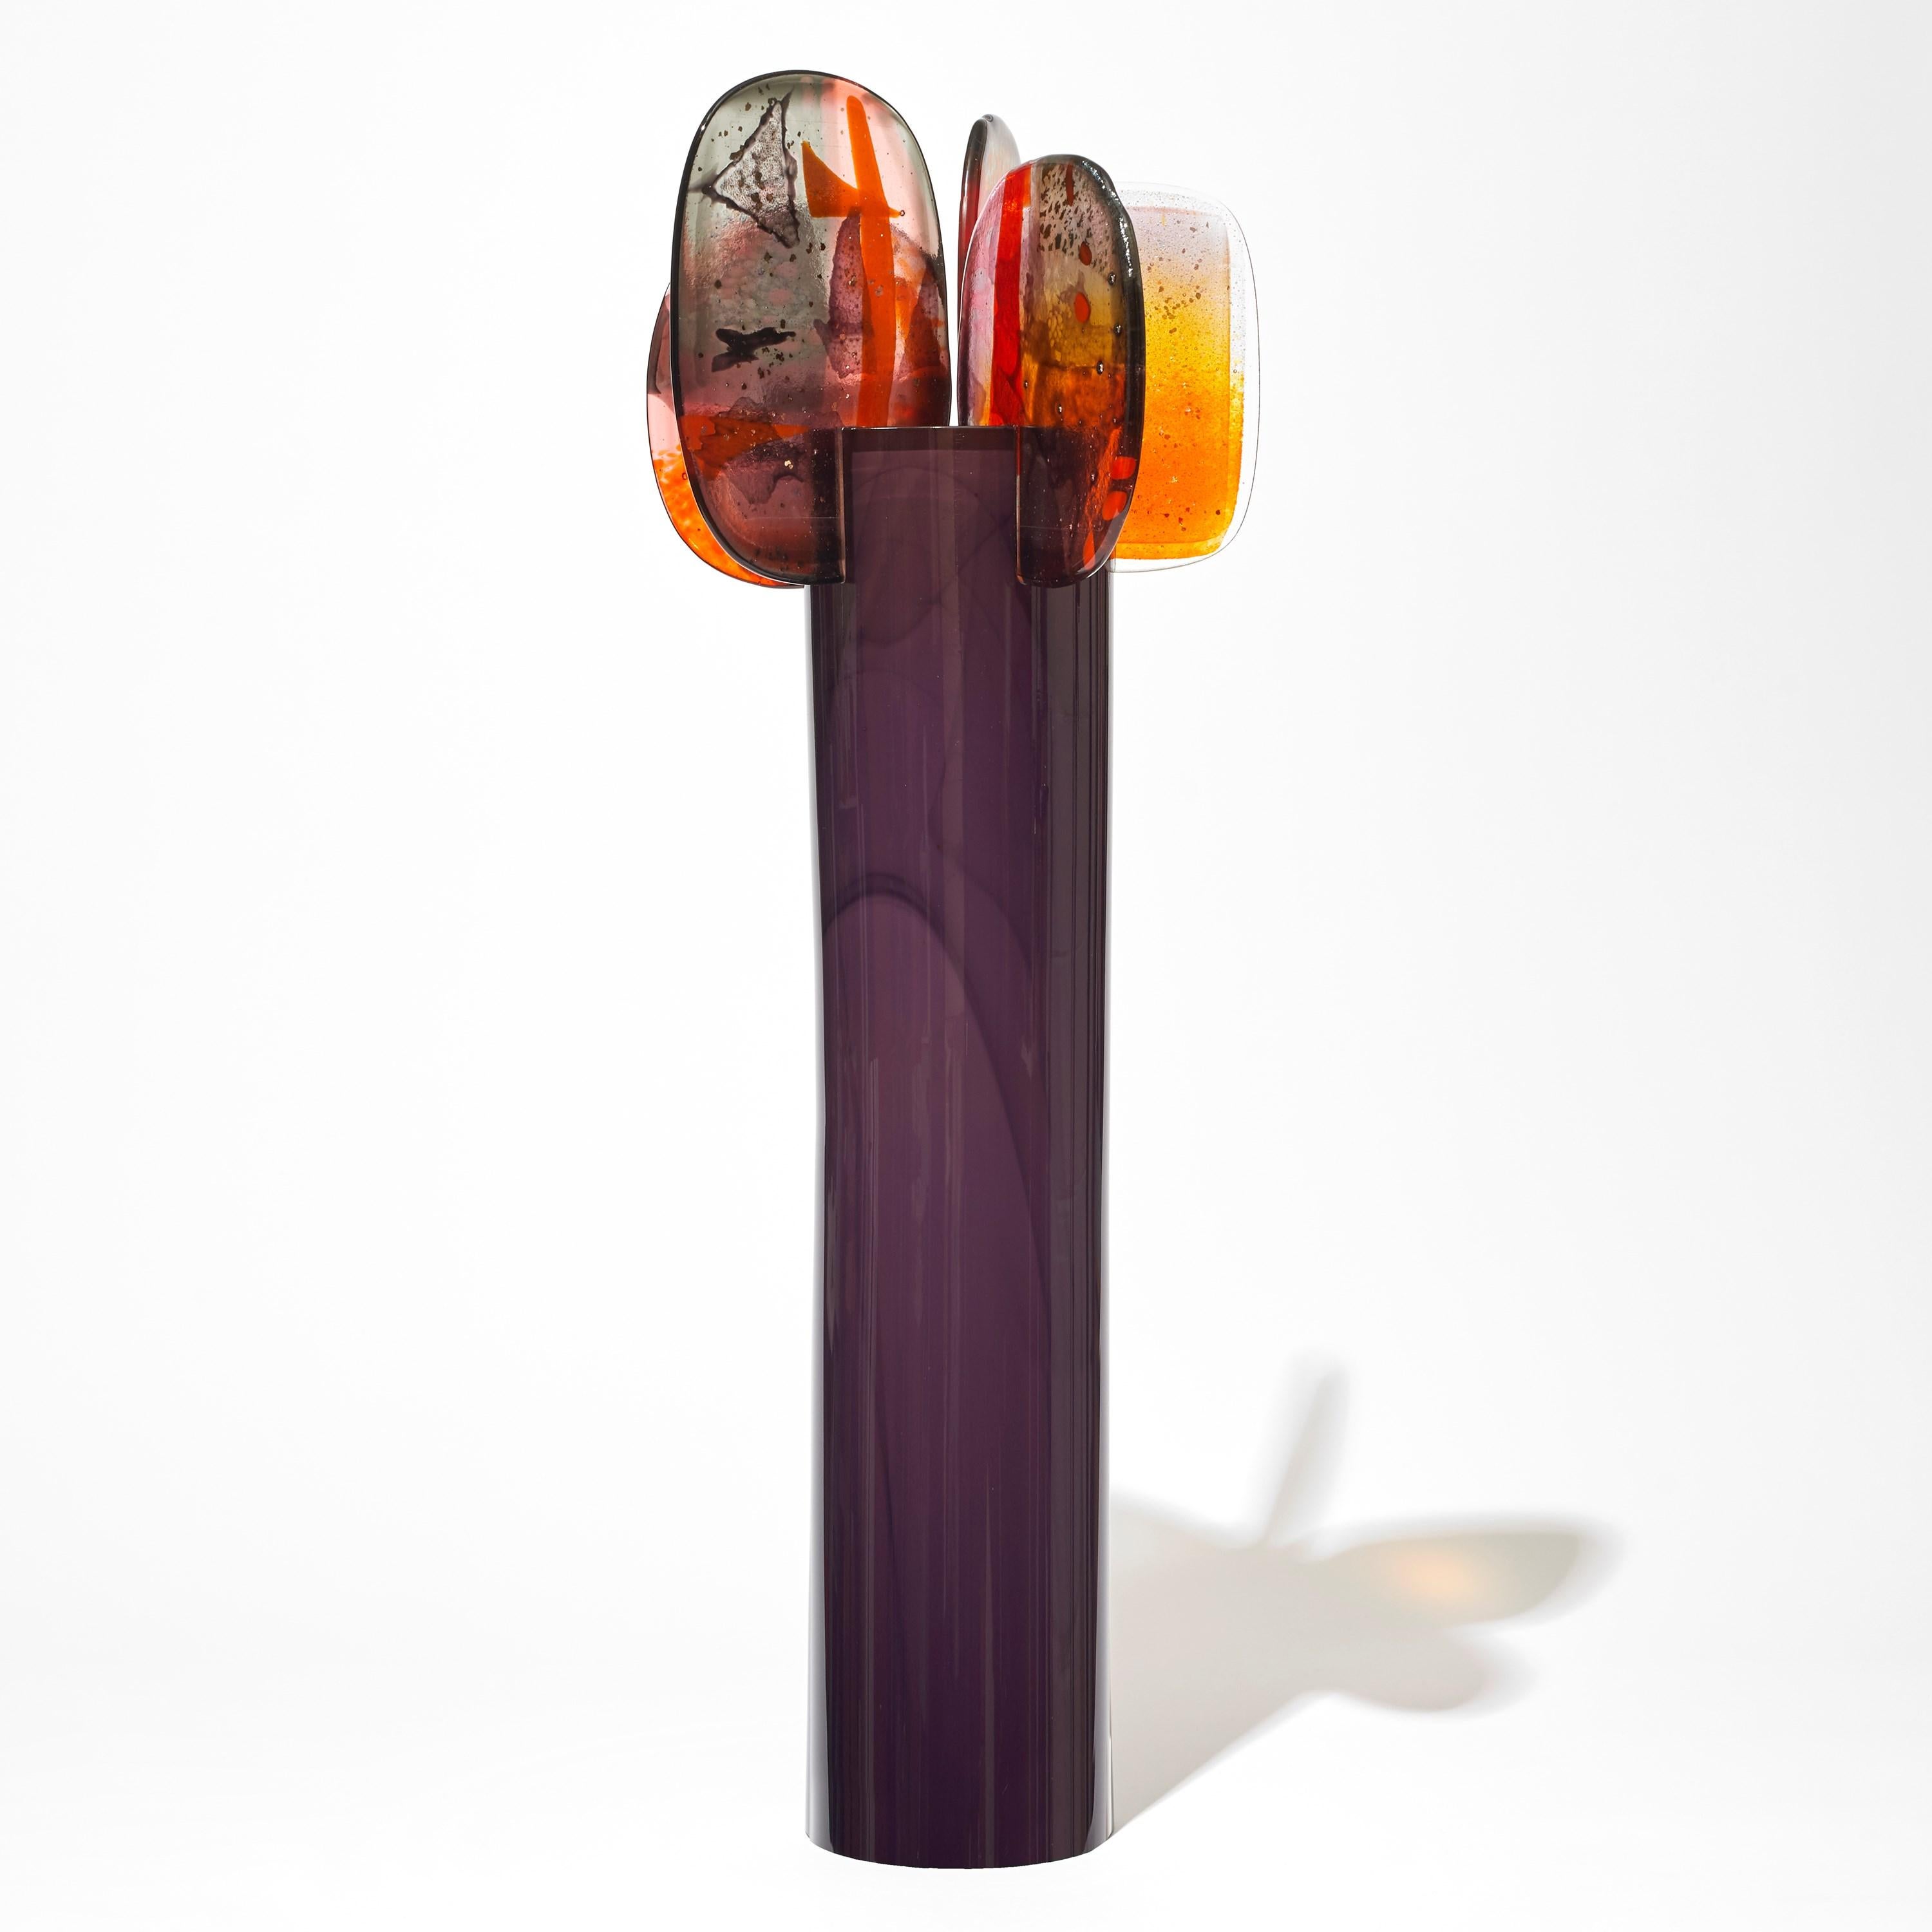 Organic Modern Paradise 02 in Stapelia, purple, grey, red & gold glass sculpture by Amy Cushing For Sale